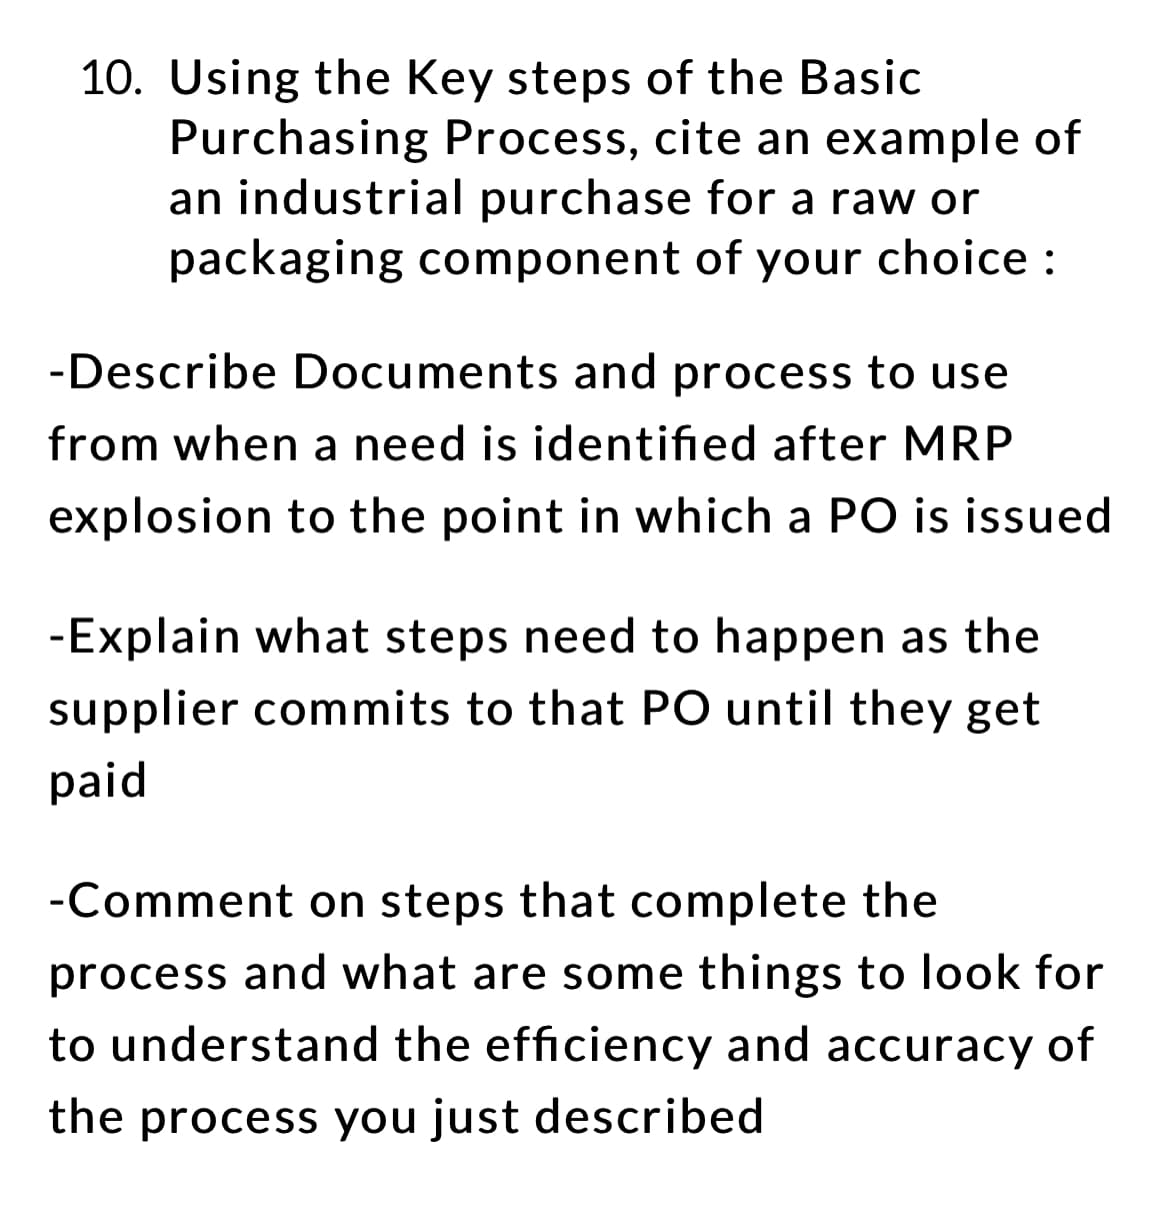 10. Using the Key steps of the Basic
Purchasing Process, cite an example of
an industrial purchase for a raw or
packaging component of your choice:
-Describe Documents and process to use
from when a need is identified after MRP
explosion to the point in which a PO is issued
-Explain what steps need to happen as the
supplier commits to that PO until they get
paid
-Comment on steps that complete the
process and what are some things to look for
to understand the efficiency and accuracy of
the process you just described